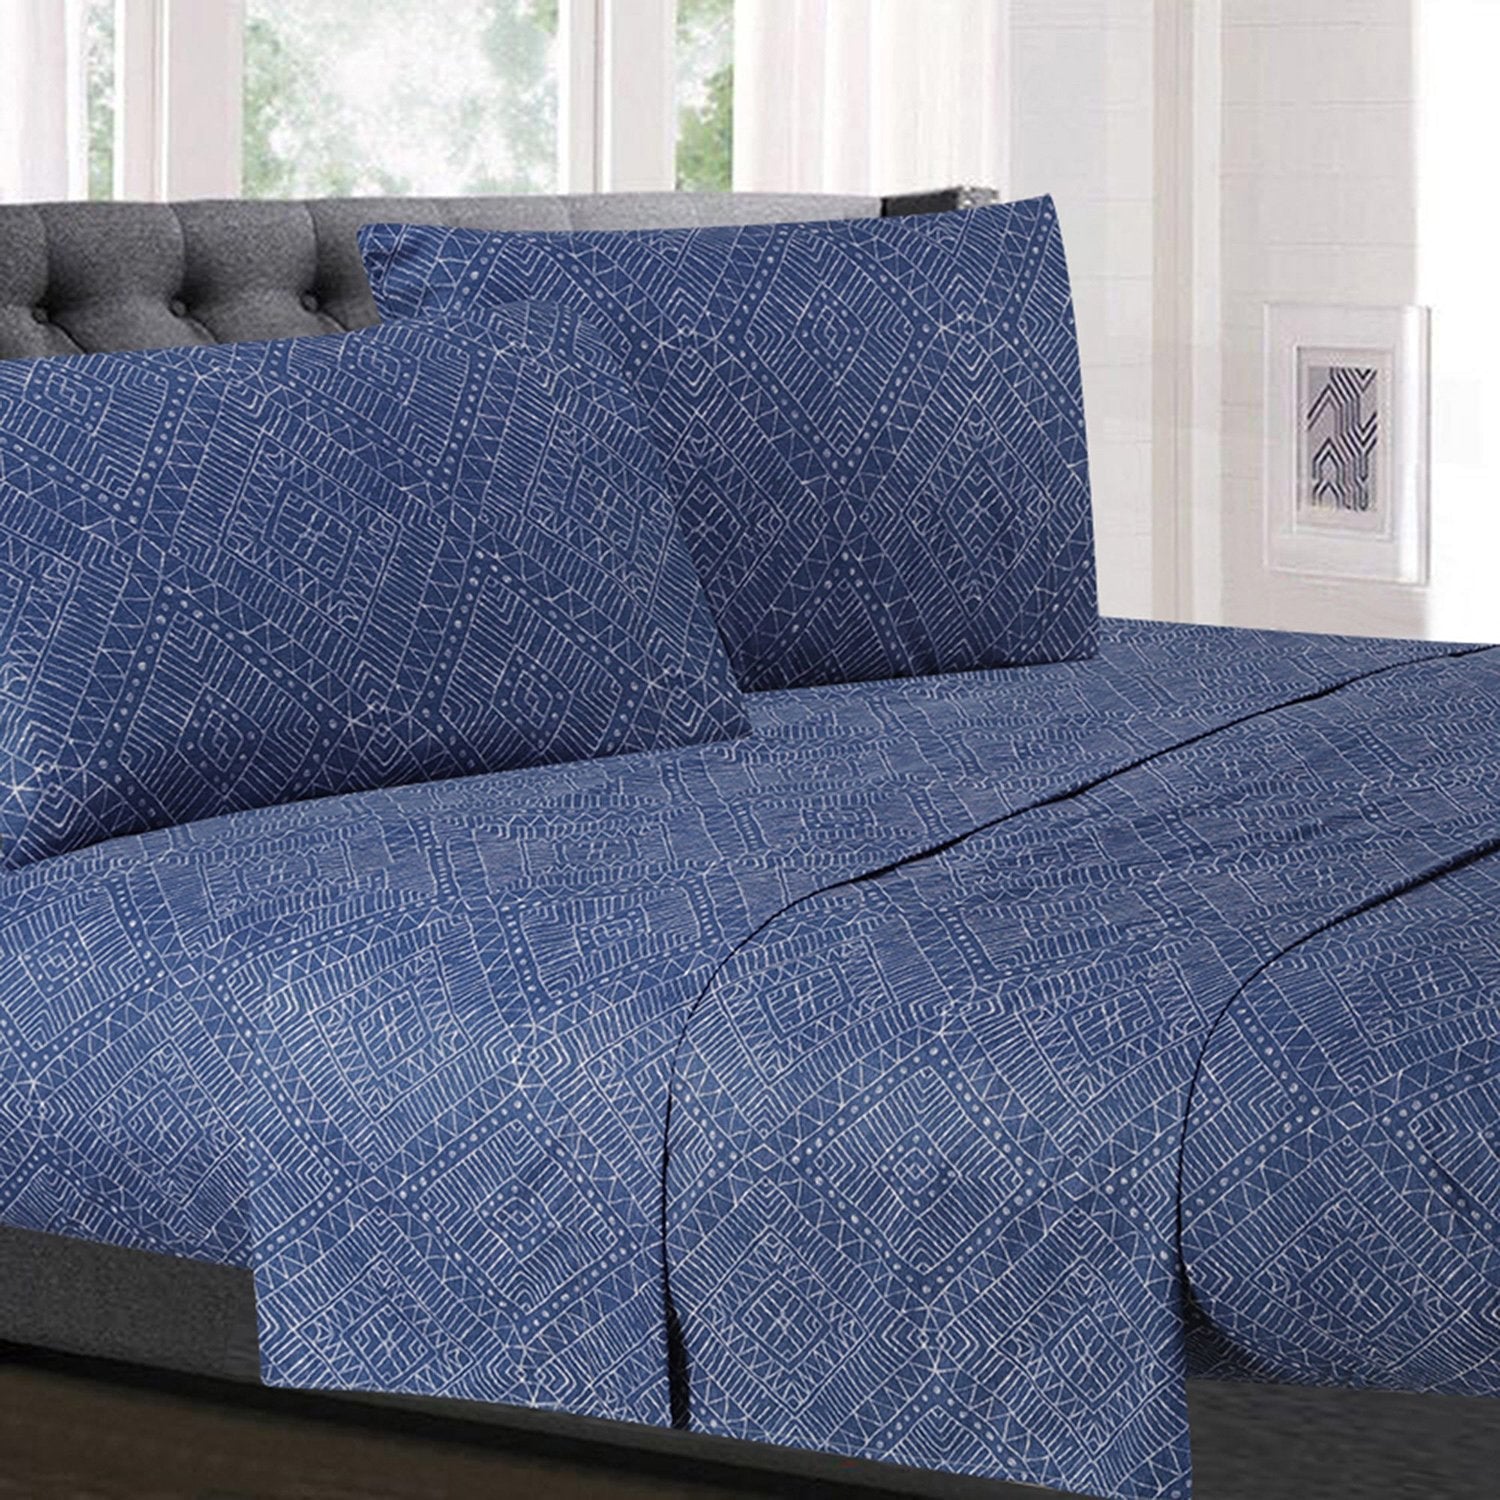 Classic 4-Piece Bed Sheet Set (Parkview Blue Diamond) - Bed